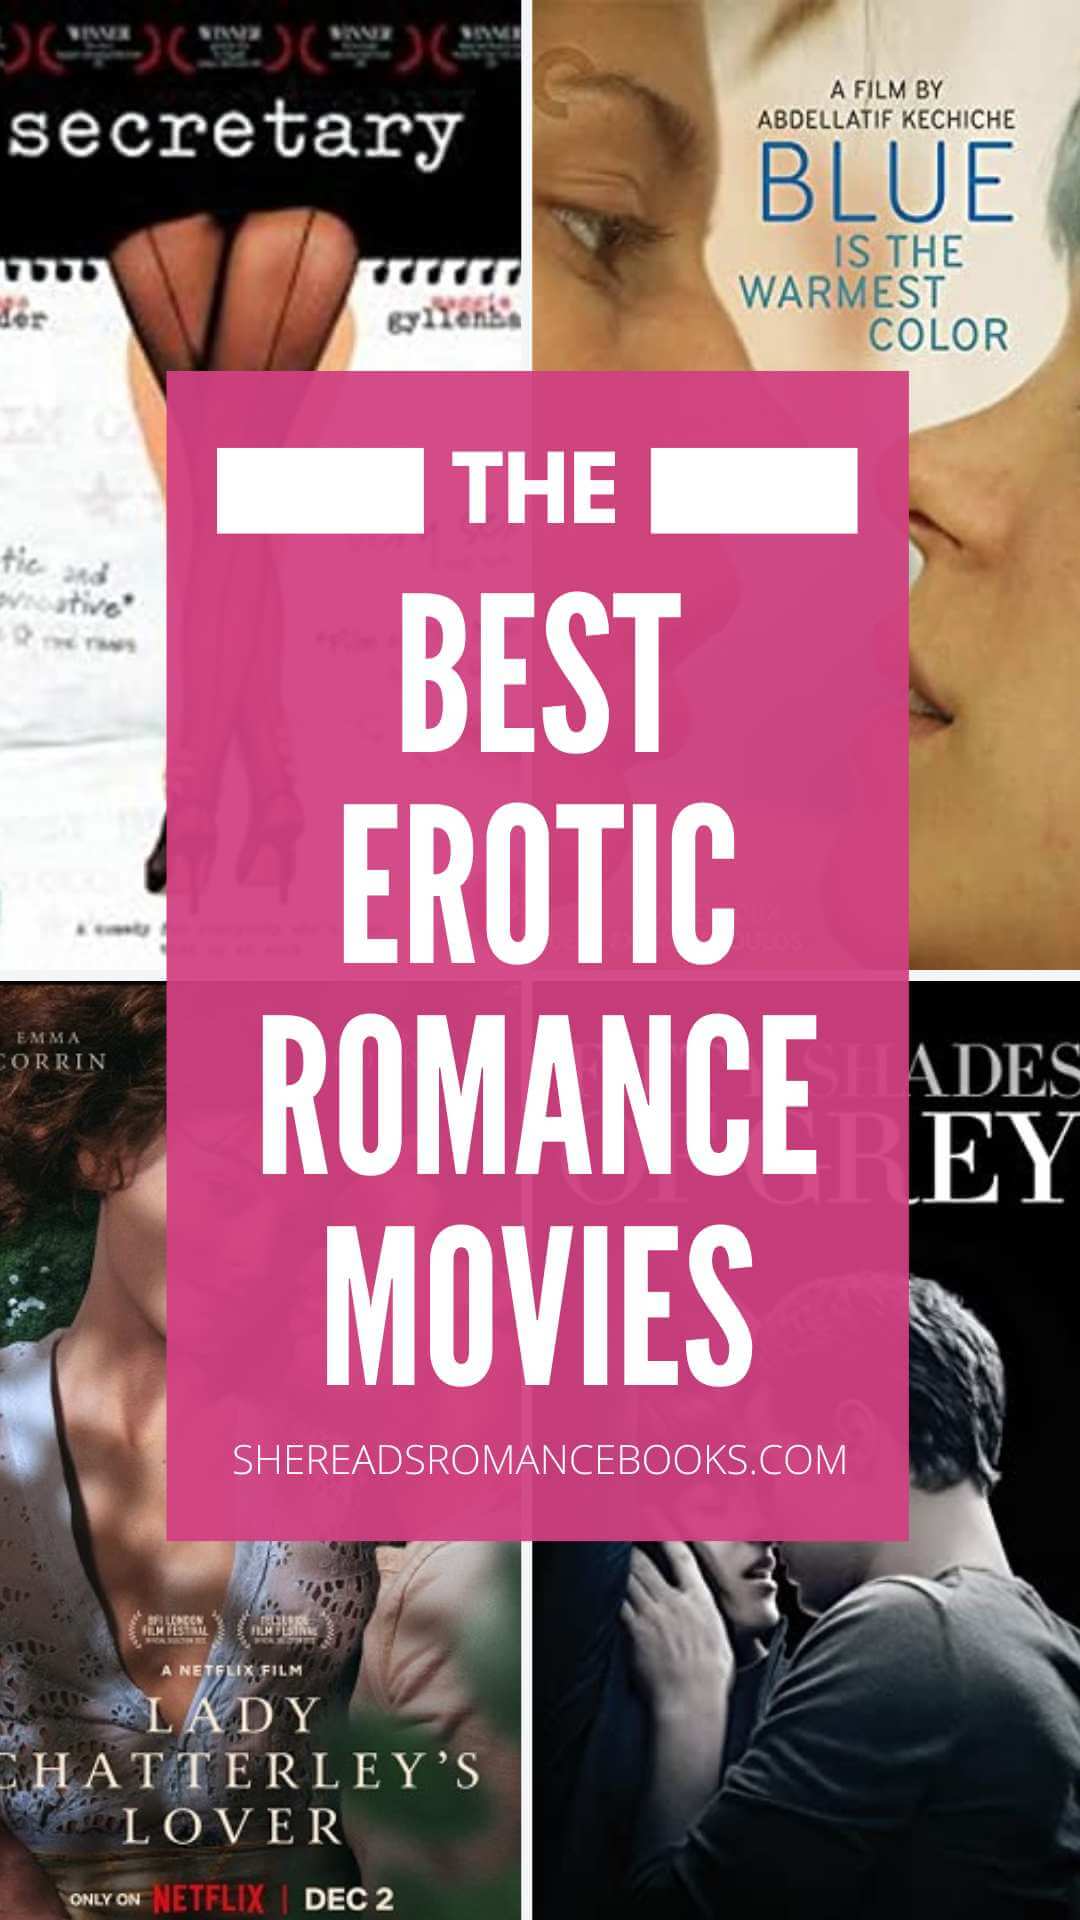 carlos emilio hernandez recommends steamy romance movies online pic